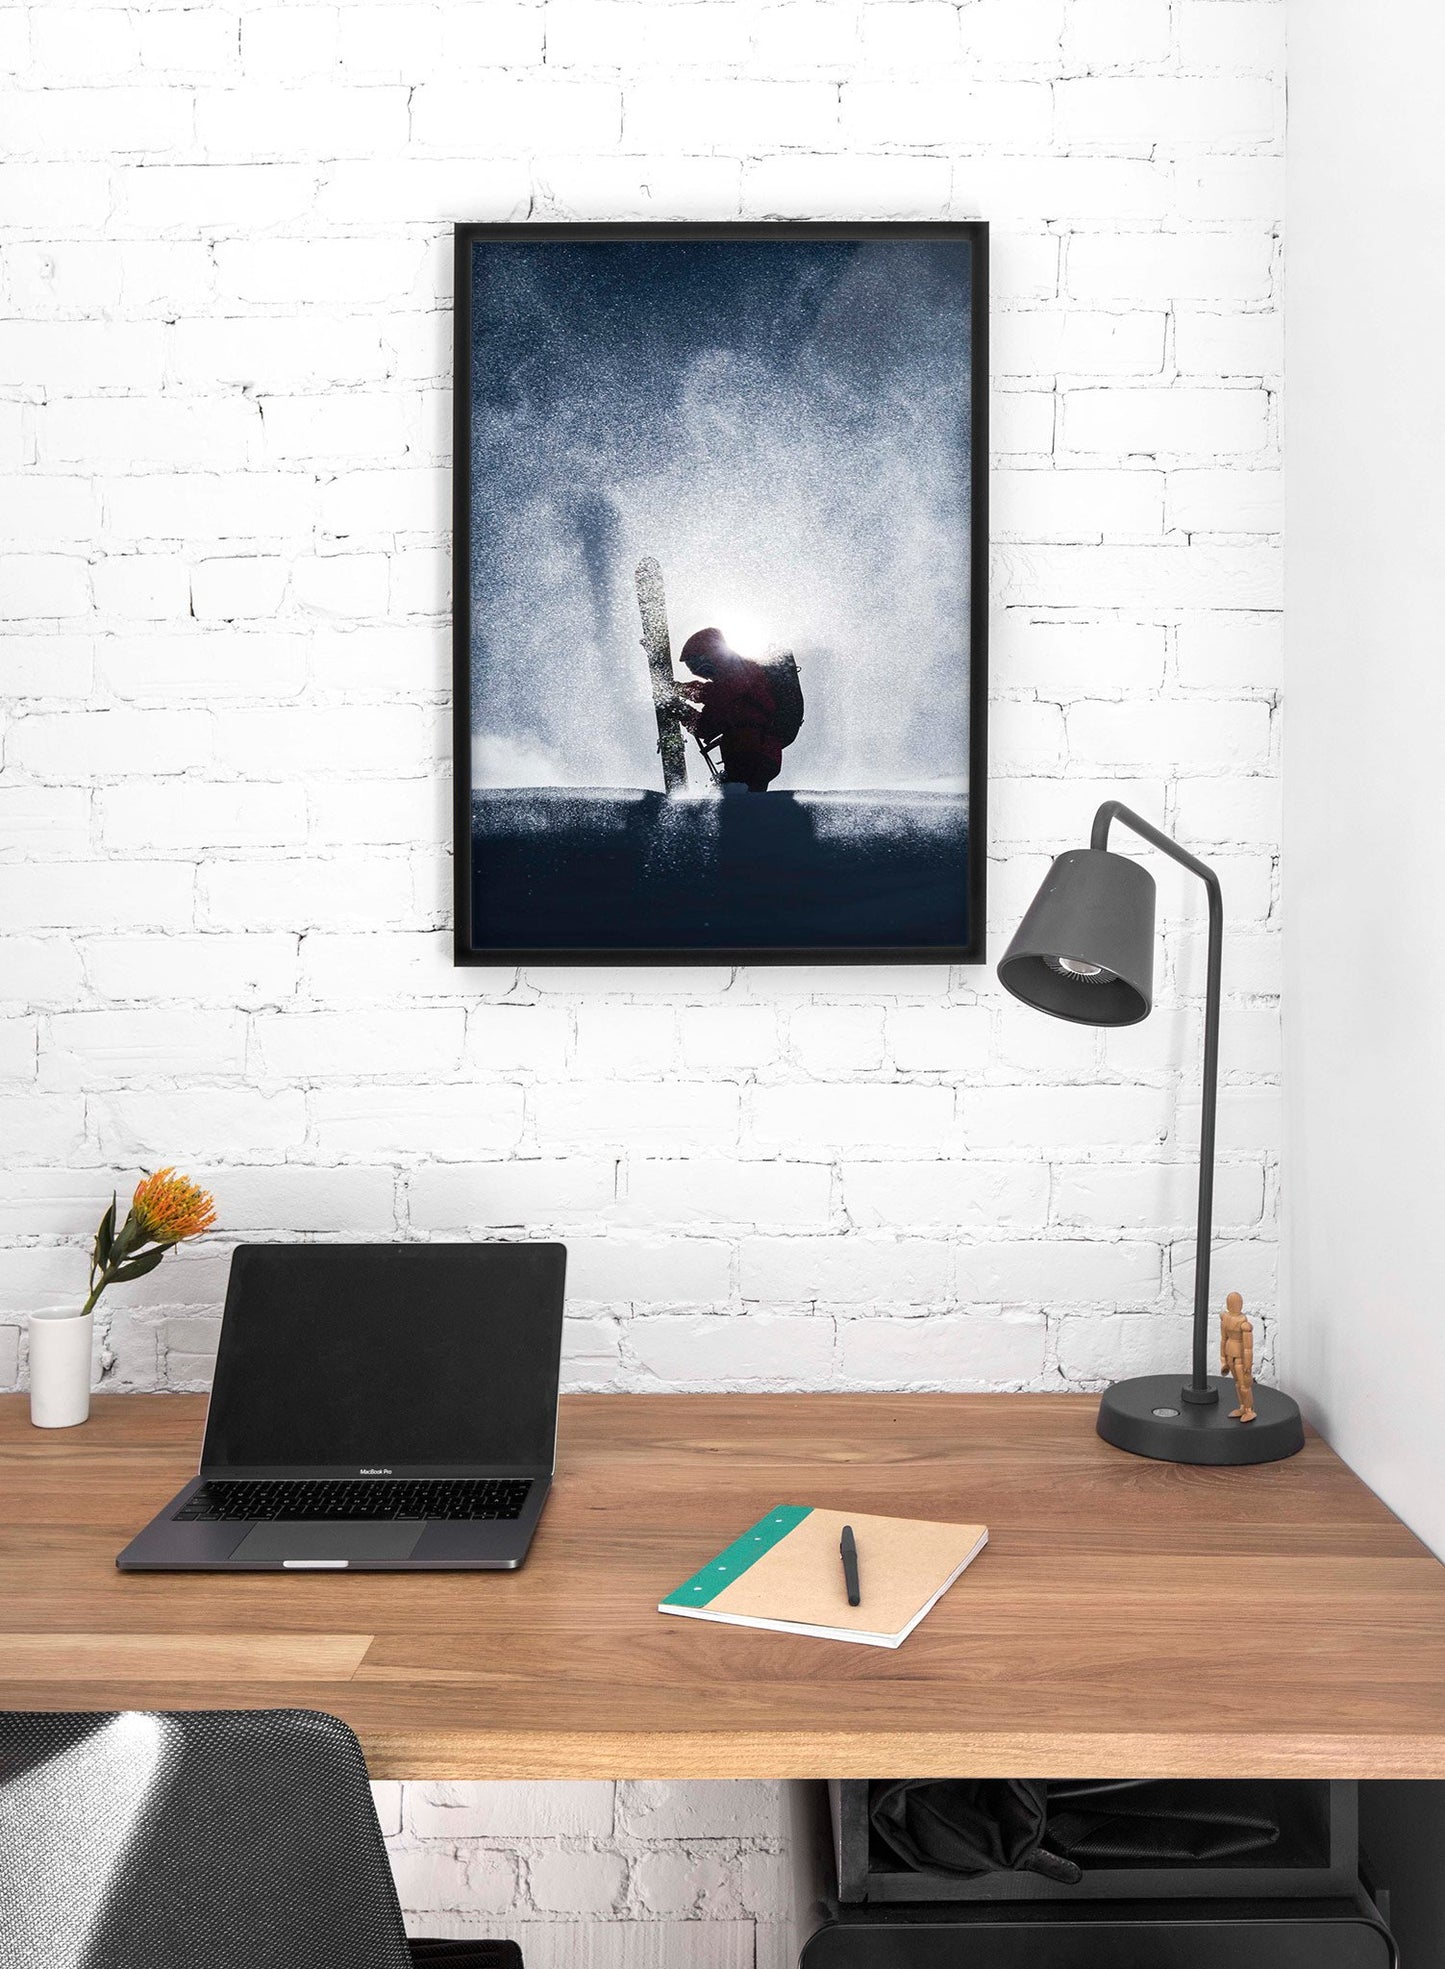 Landscape photography poster by Opposite Wall with falling snow and portrait of skier - Lifestyle - Office Desk